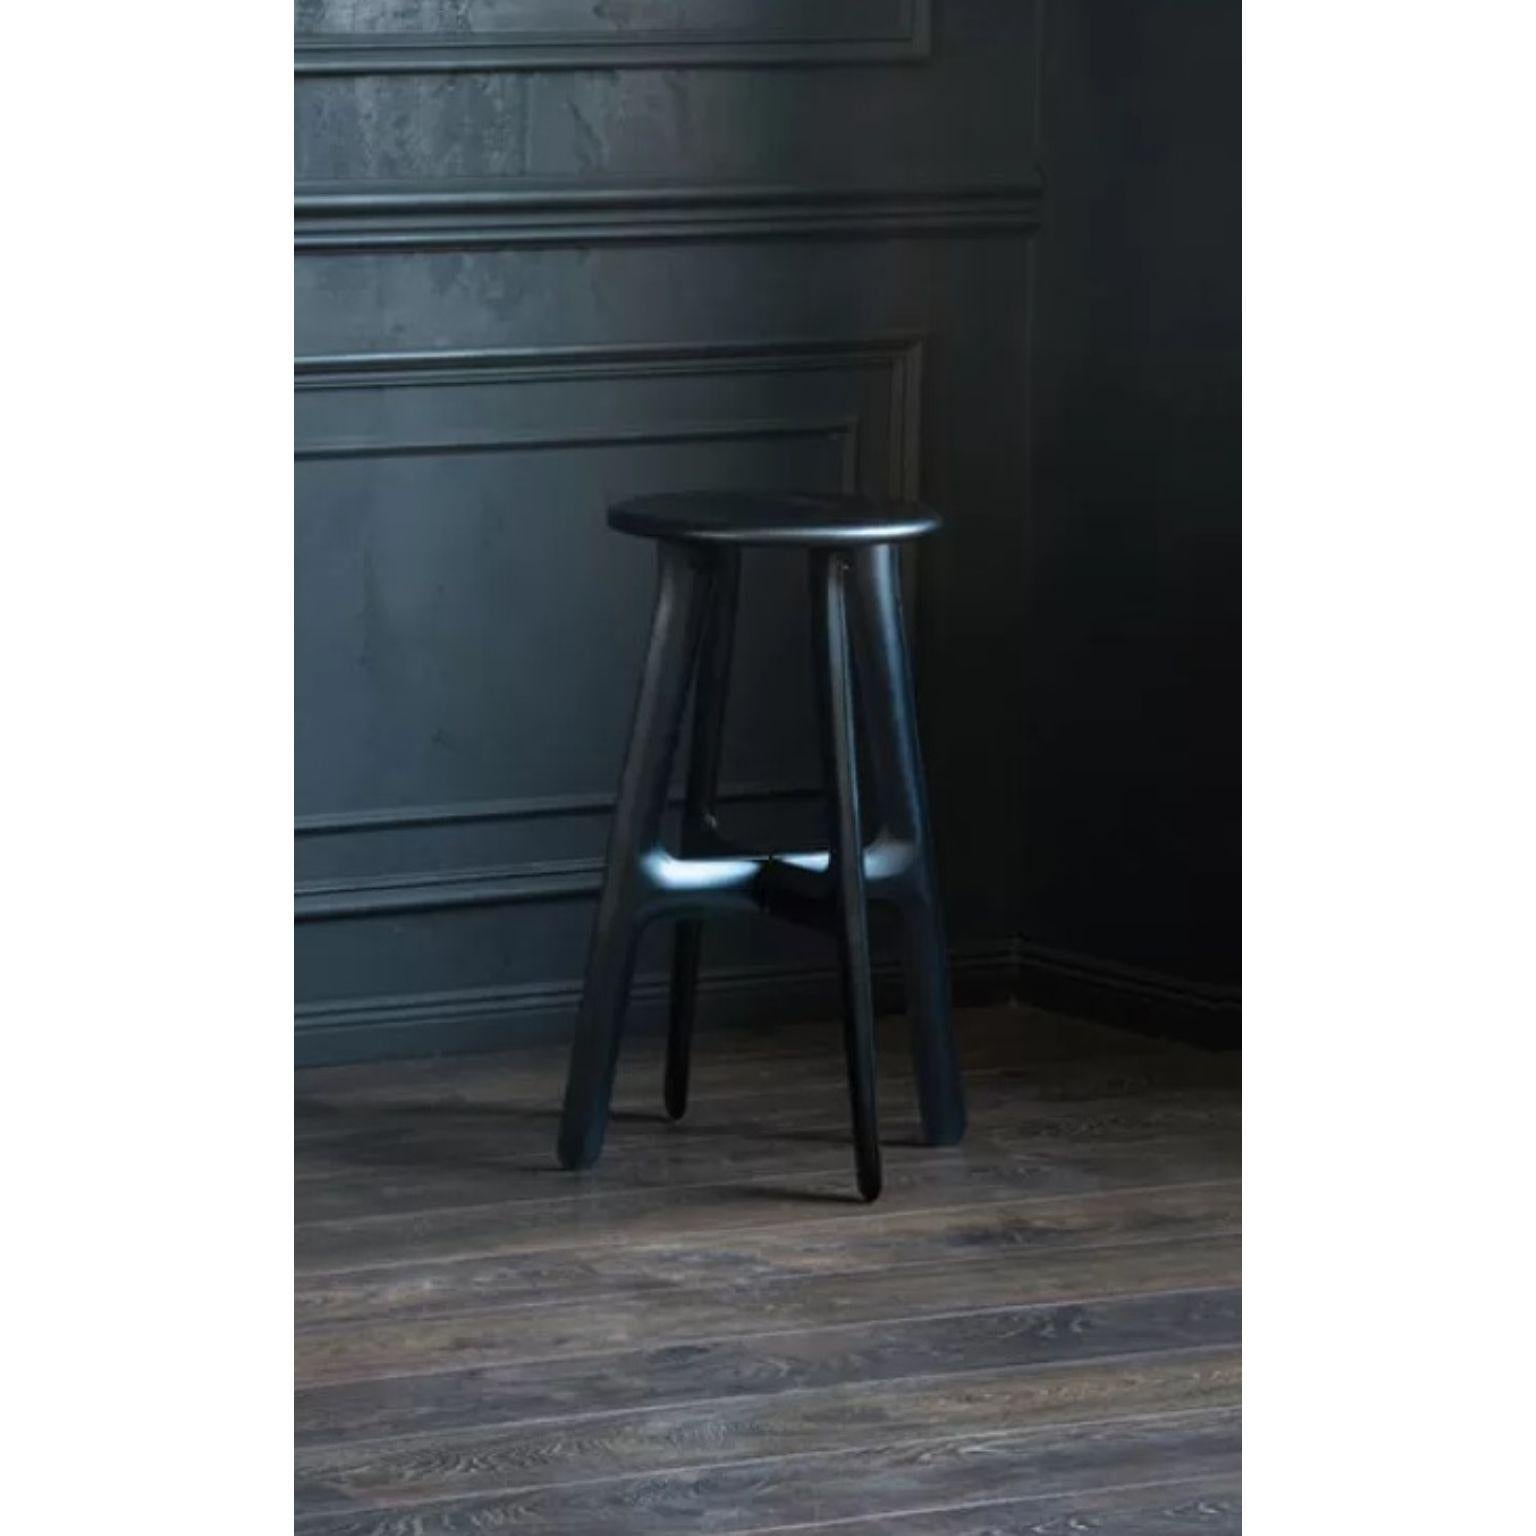 Ultraleggera Anodic Black Bar Stool by Zieta
Dimensions: Ø 34 x H 68 cm.
Materials: Aluminum.
Finish: Anodic black.

Inspired by the features of the Ultraleggera chair, we expanded its concept with new objects. Please welcome the family driven by